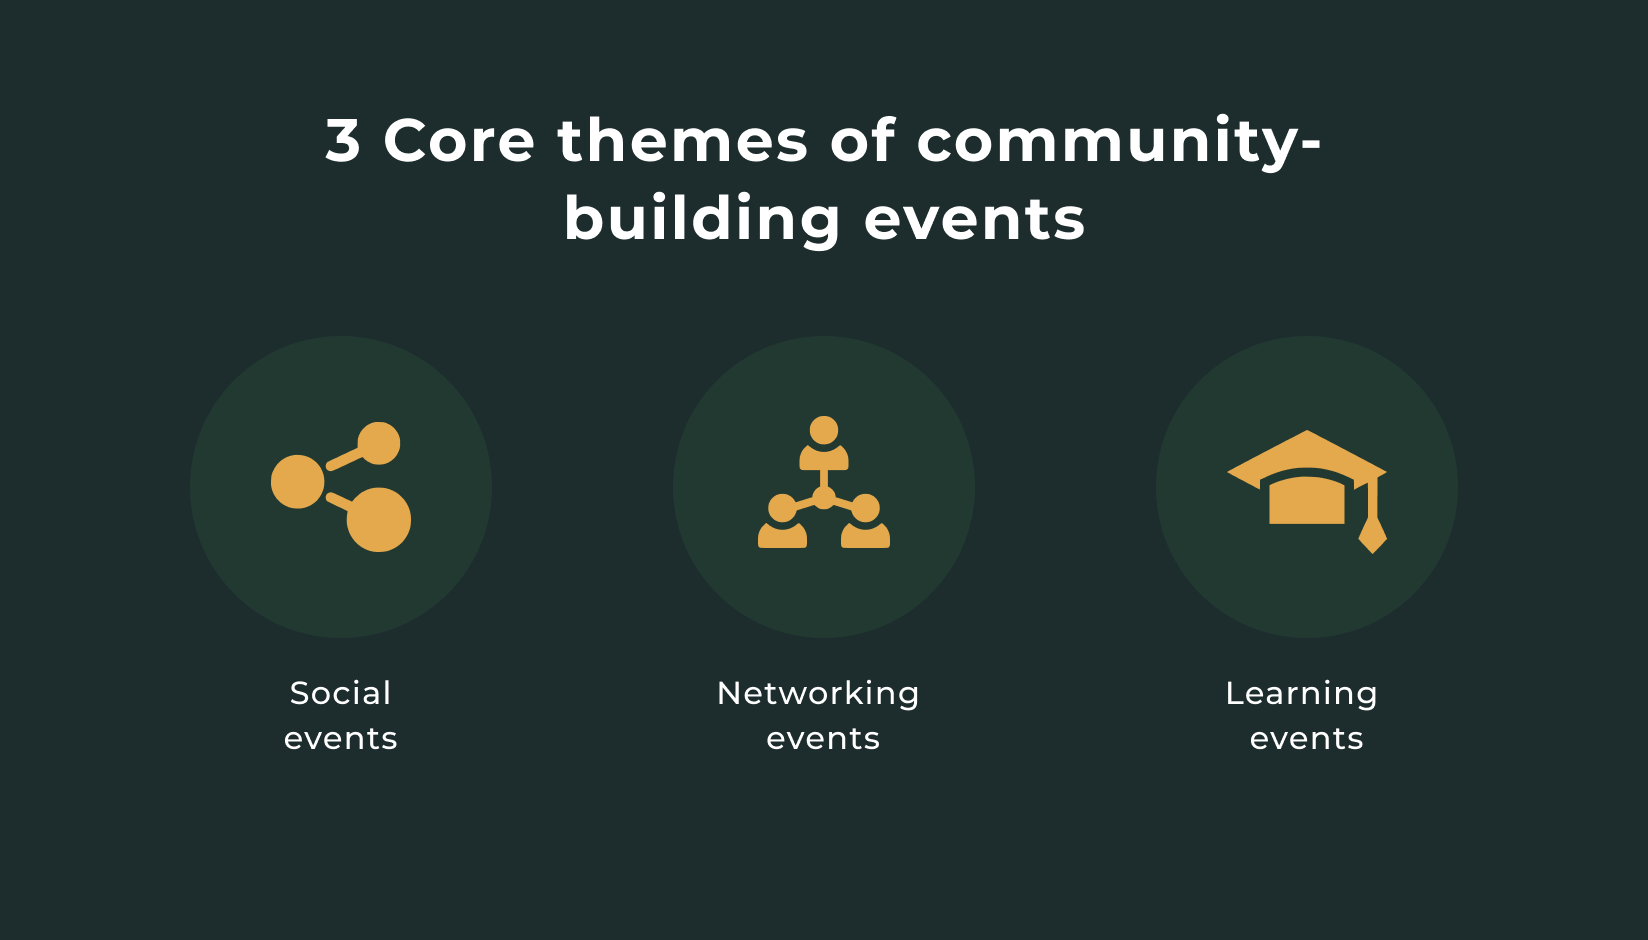 3 core themes of community-building events - infographic